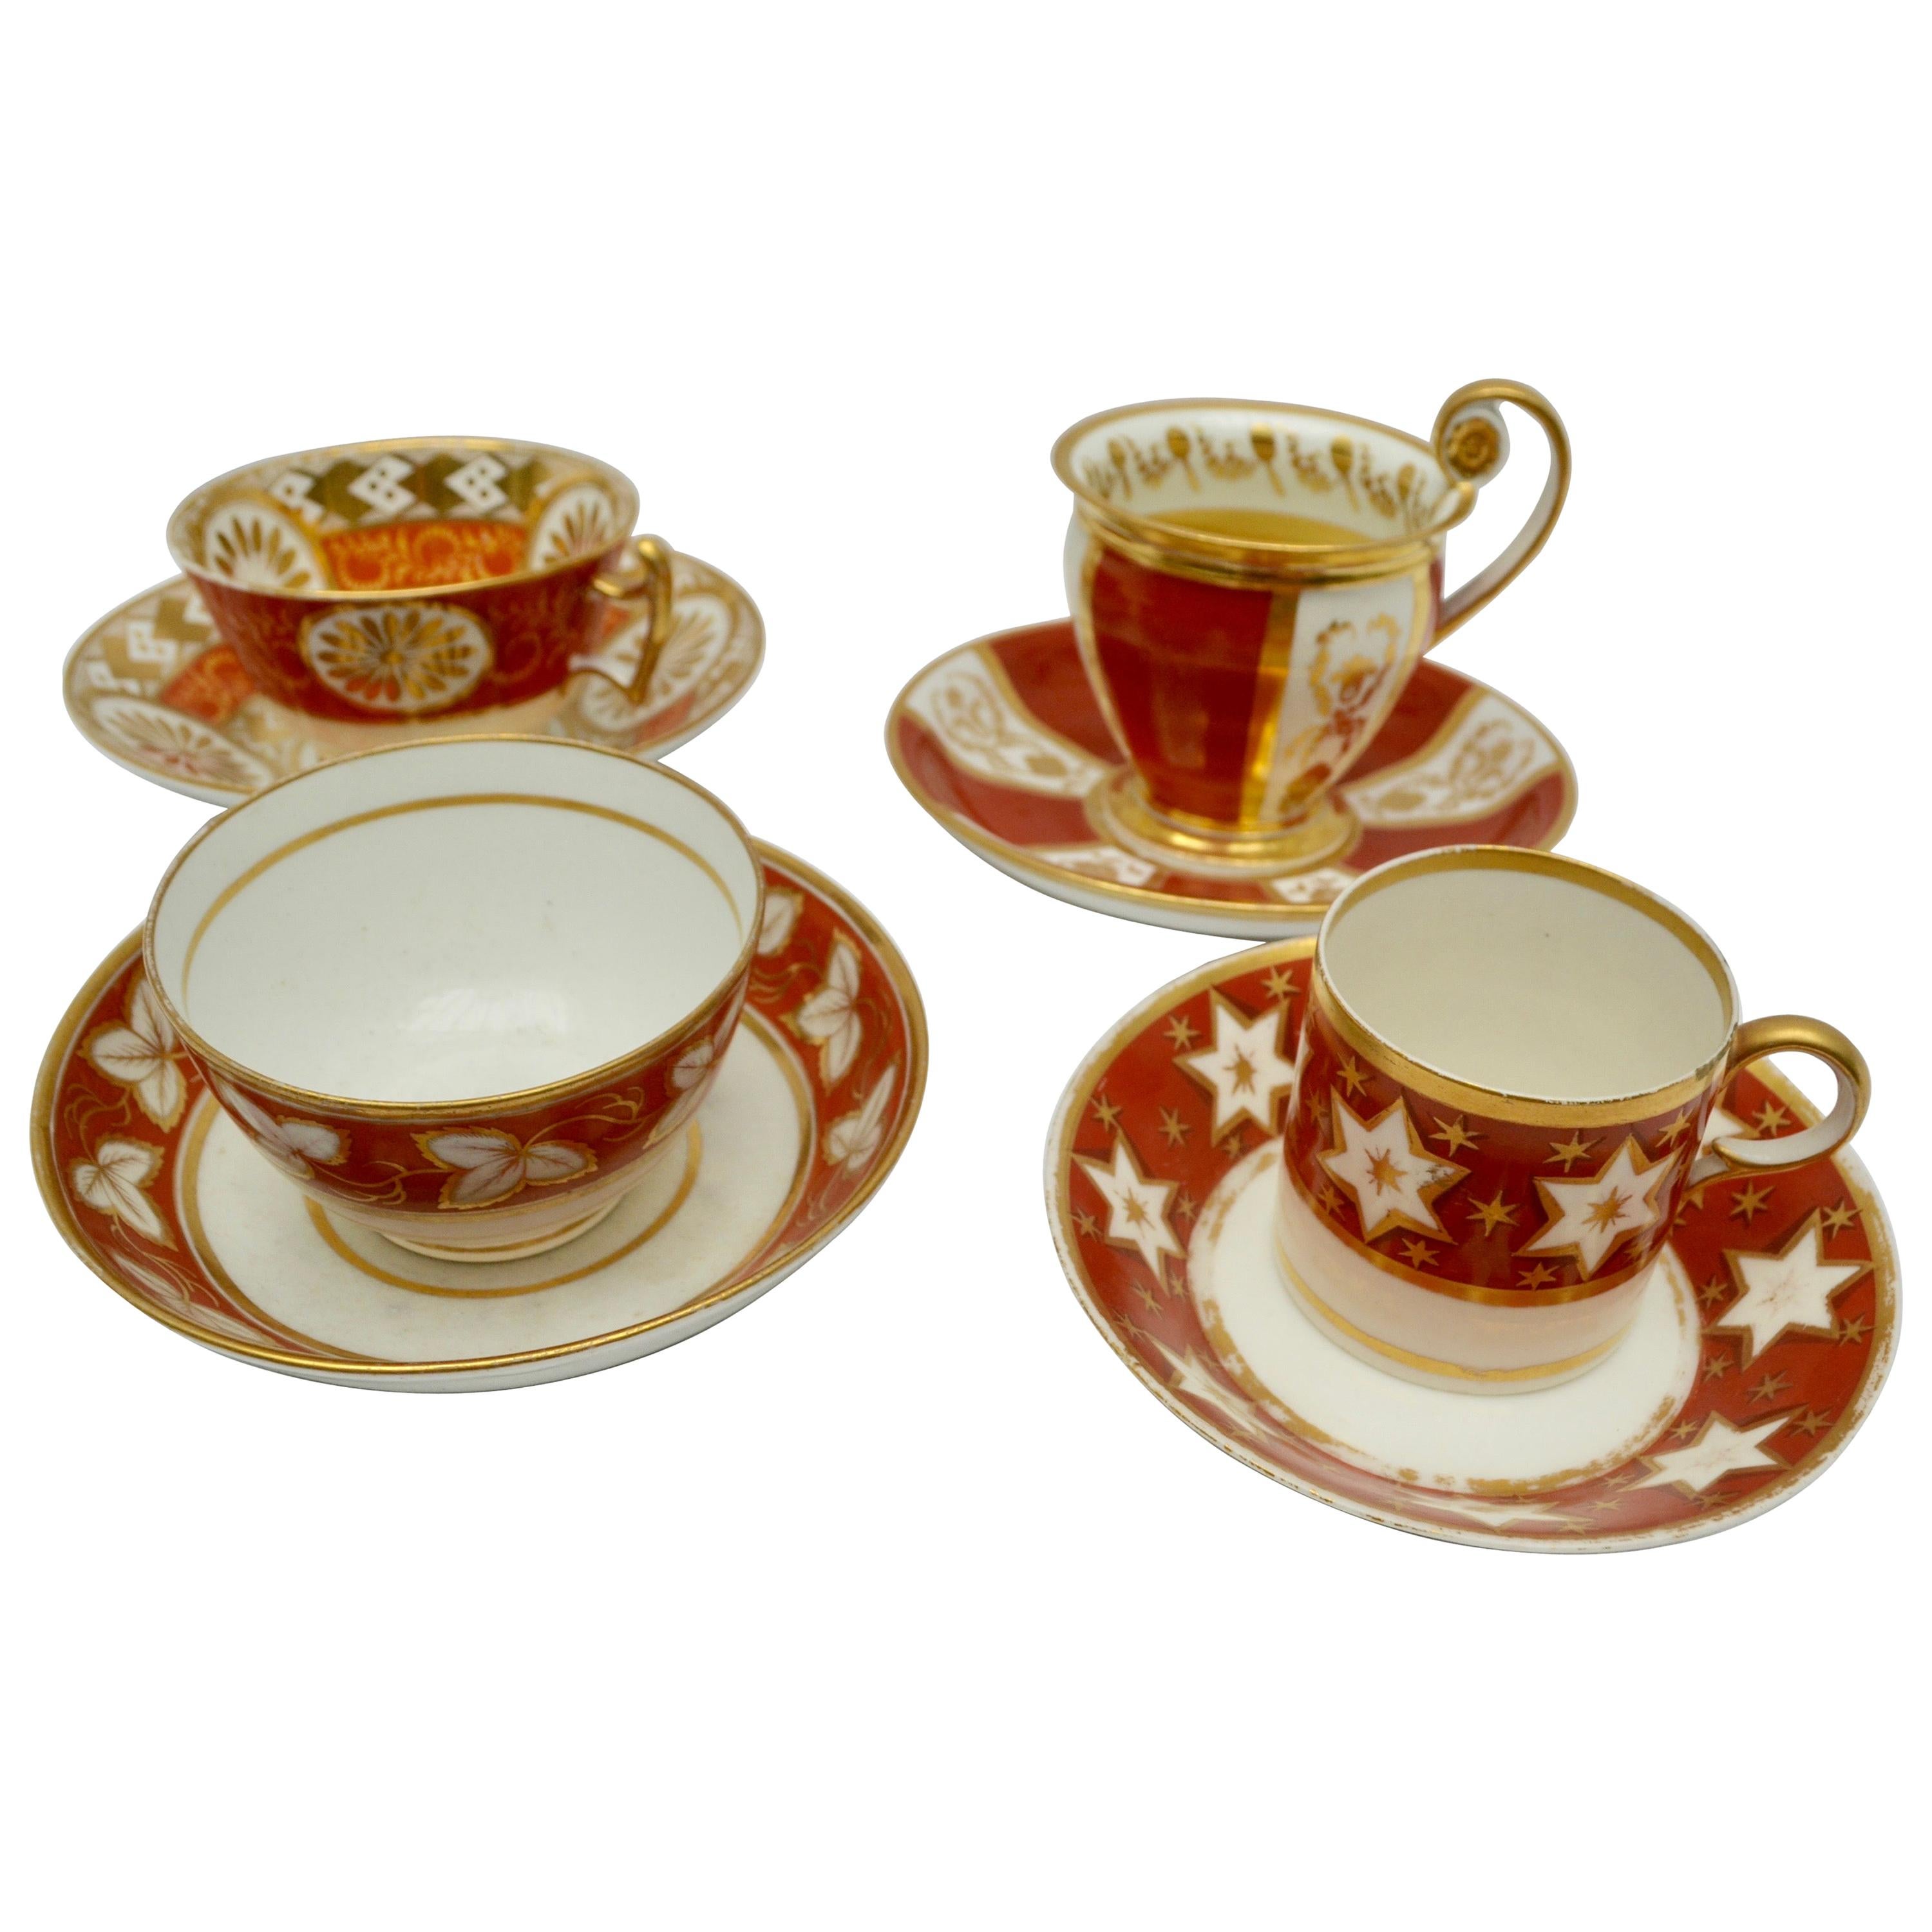 Four Early 19th Century Cups and Saucers, English and Paris